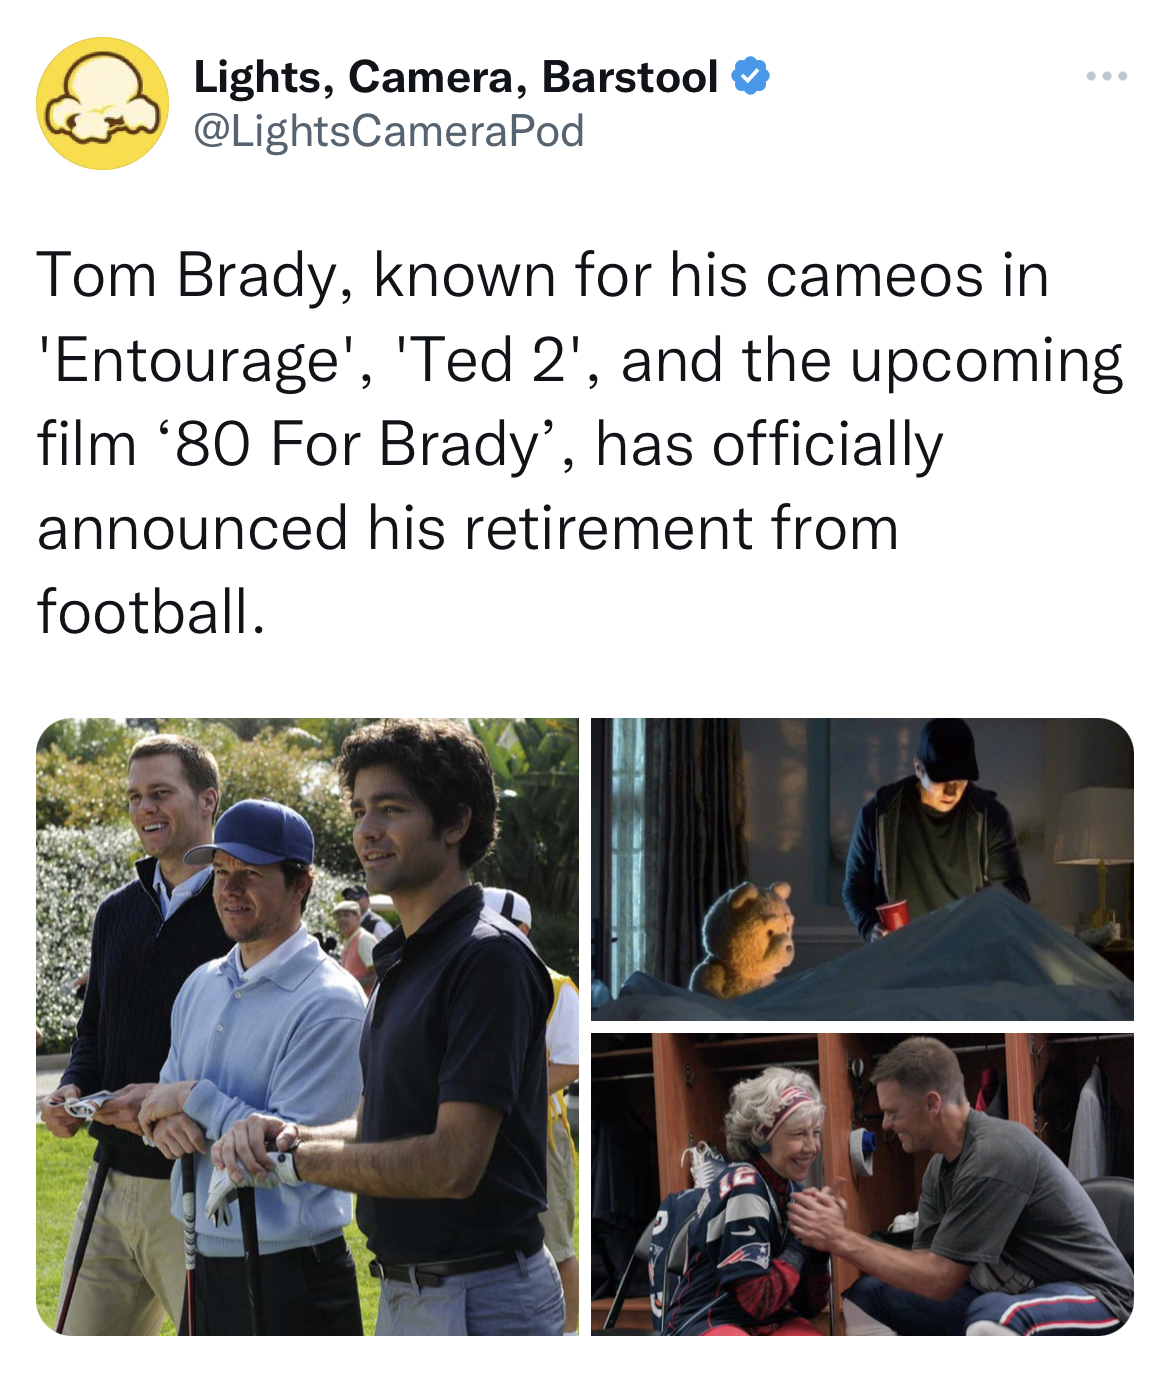 Tom Brady Retirement memes - tom brady entourage - Lights, Camera, Barstool Pod www dy, known for his cameos in 'Entourage', 'Ted 2', and the upcoming film '80 For Brady', has officially announced his retirement from football.